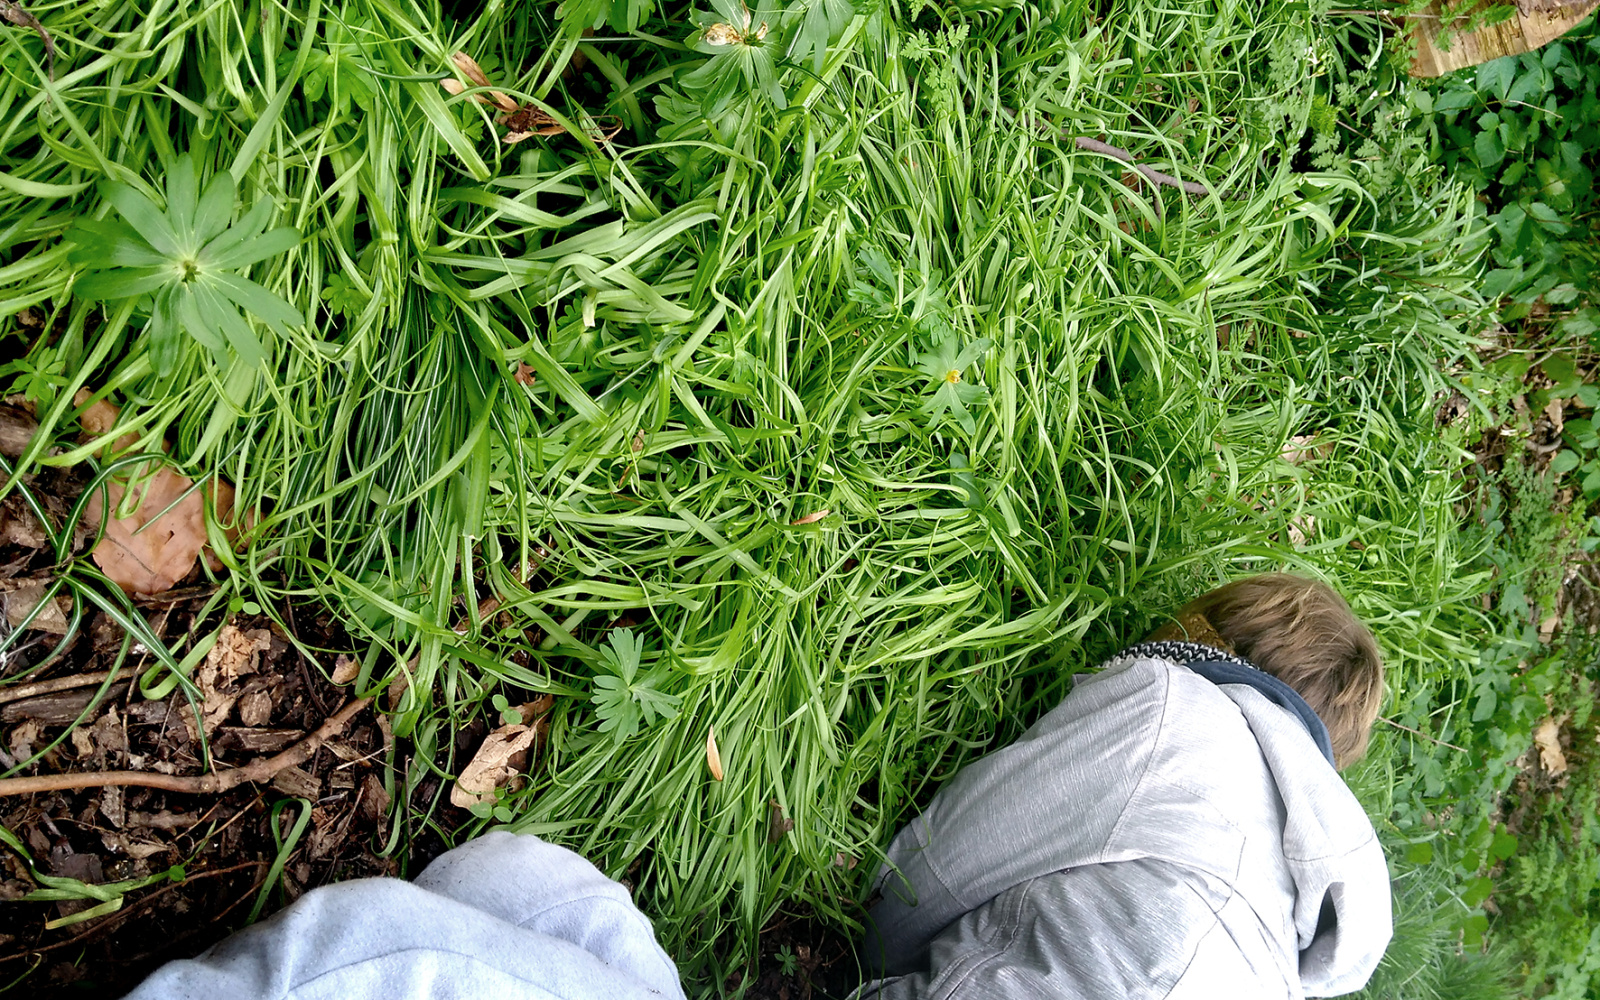 In a green meadow a person kneels down with their face on the ground.